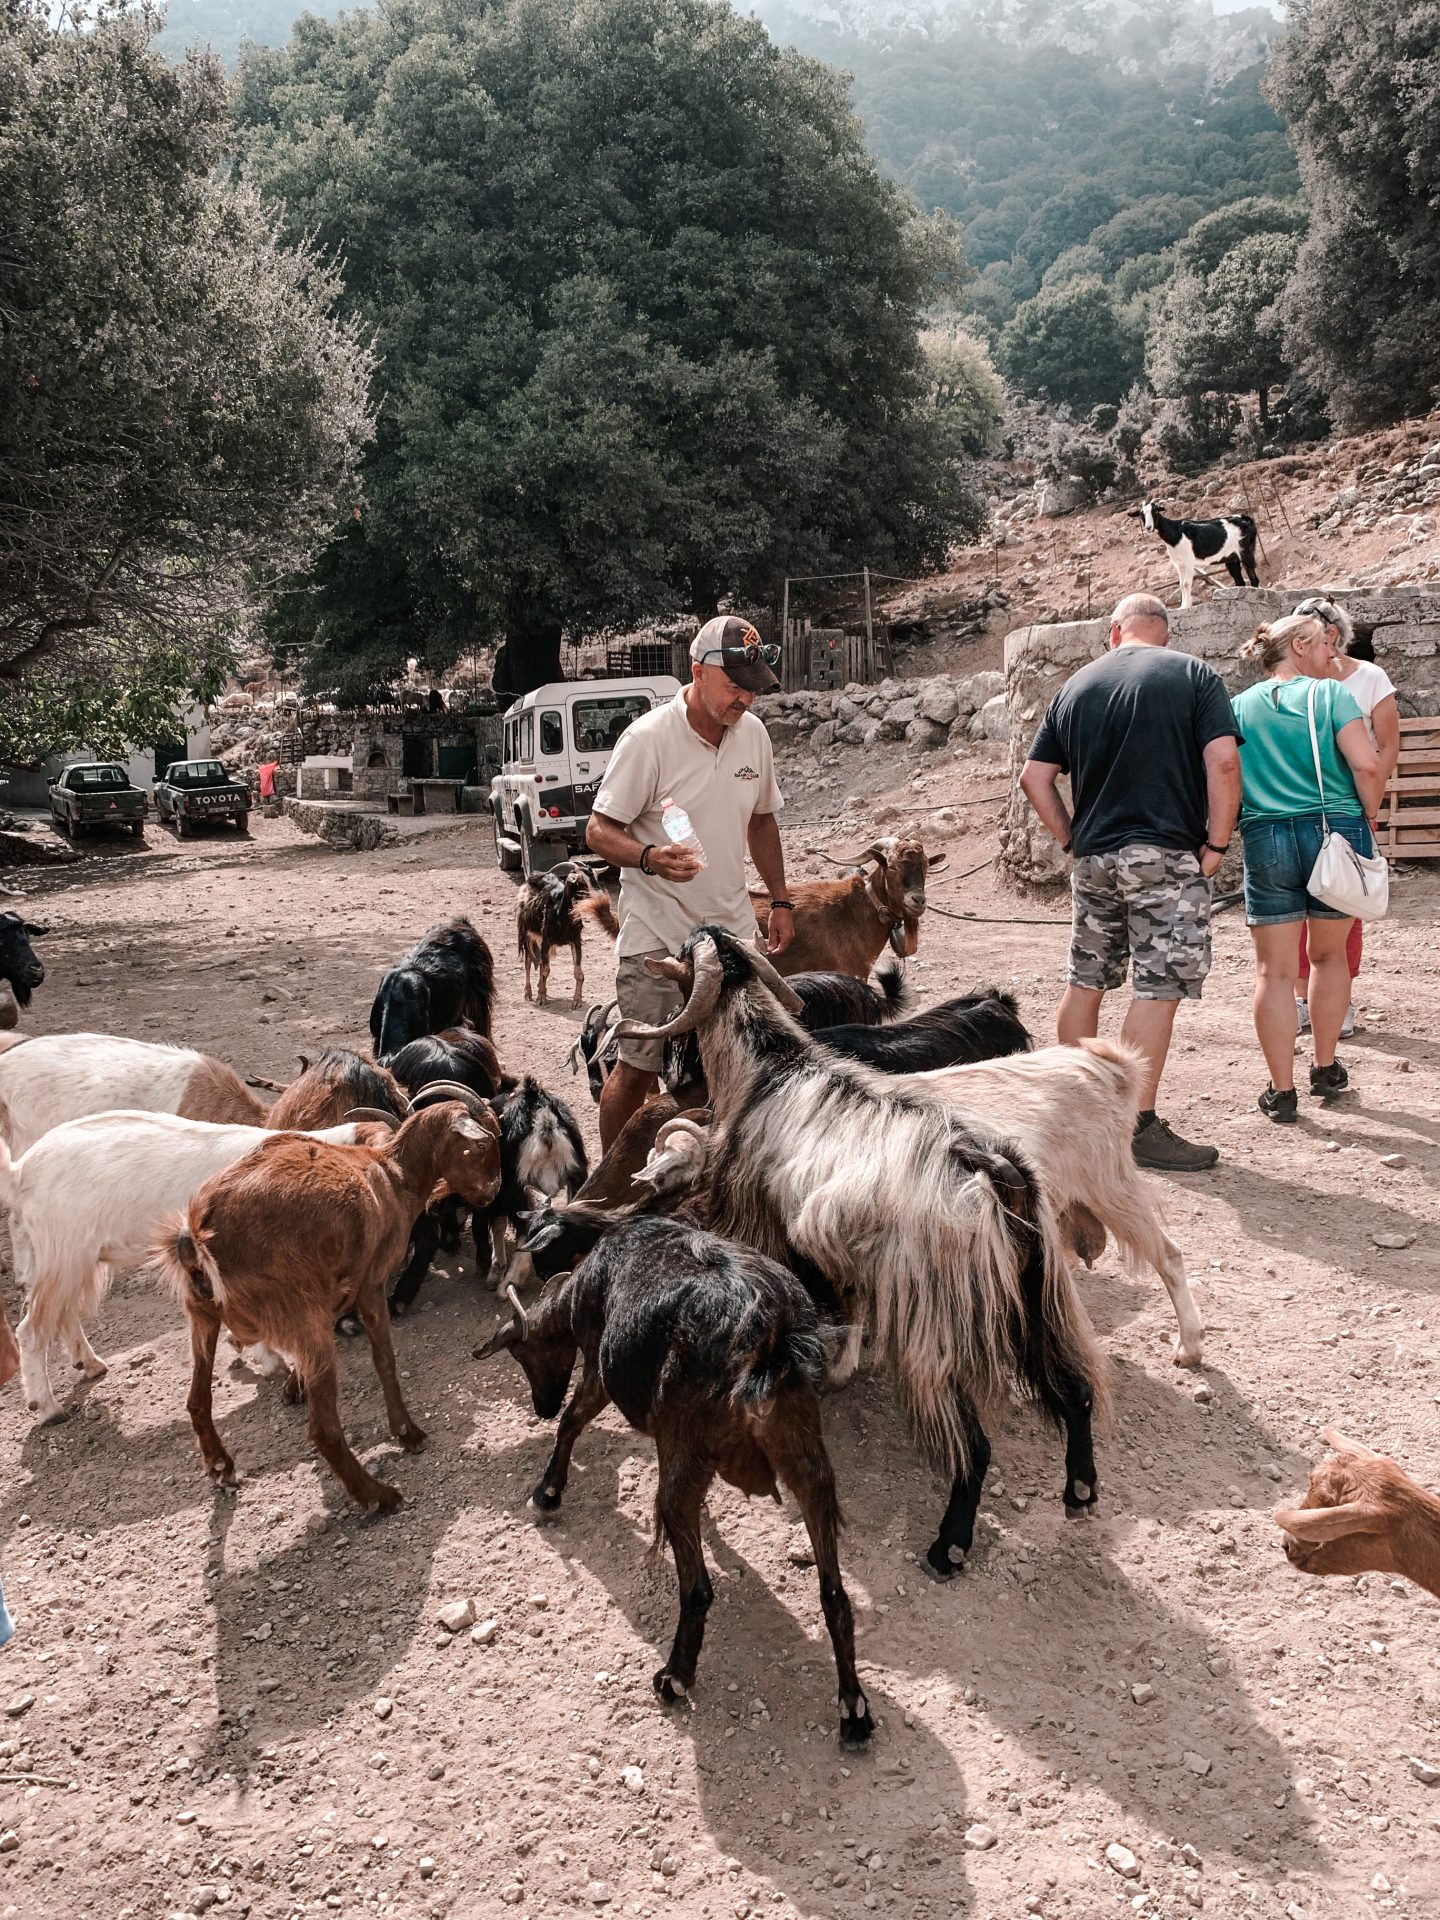 Safari Club, Minoan Route across the central part of Crete with its mythology, flora, fauna and lots of fun and interesting information about Crete and the local life.